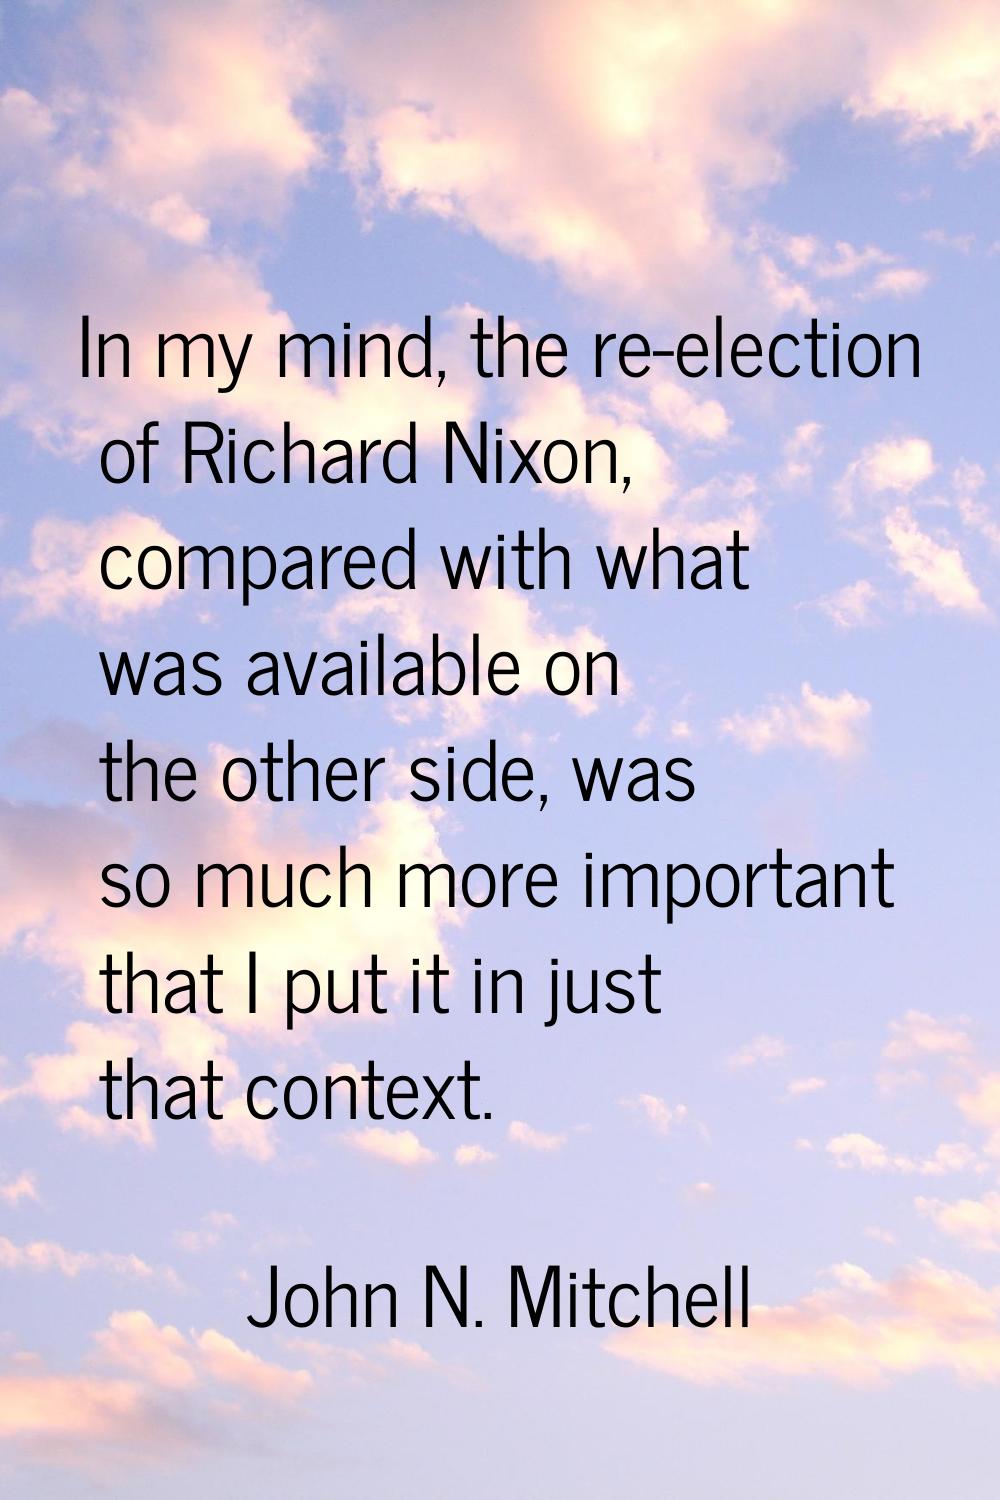 In my mind, the re-election of Richard Nixon, compared with what was available on the other side, w